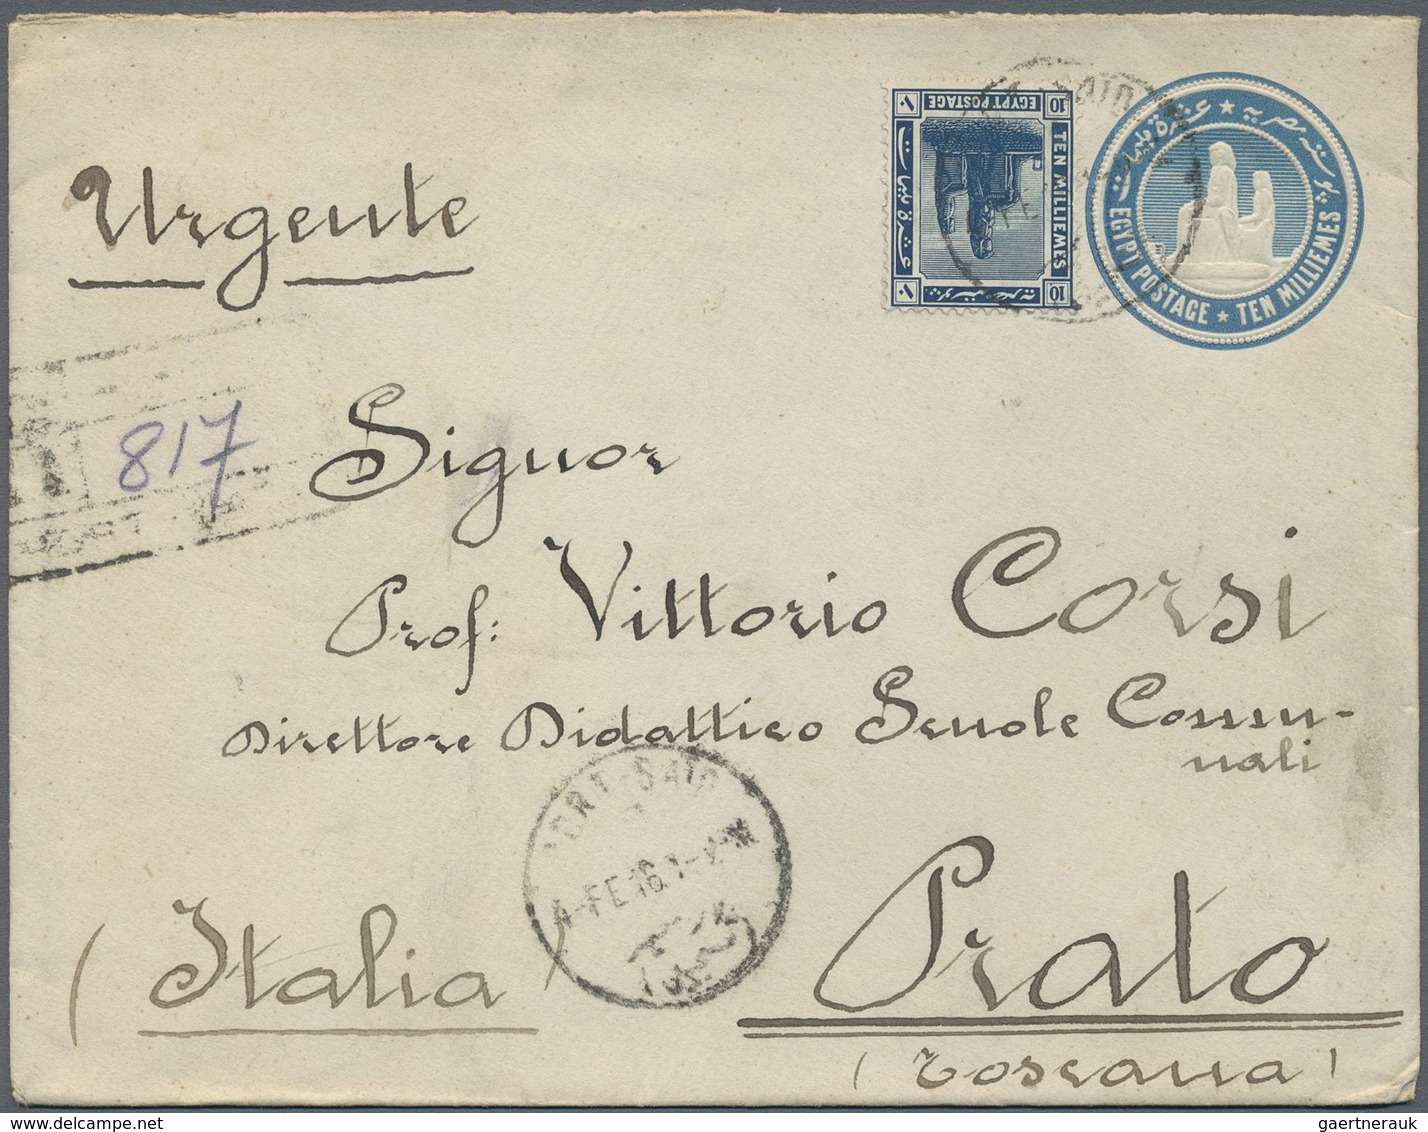 GA Ägypten - Ganzsachen: 1879-1945: Collection of 45 postal stationery items, all used postally, with p